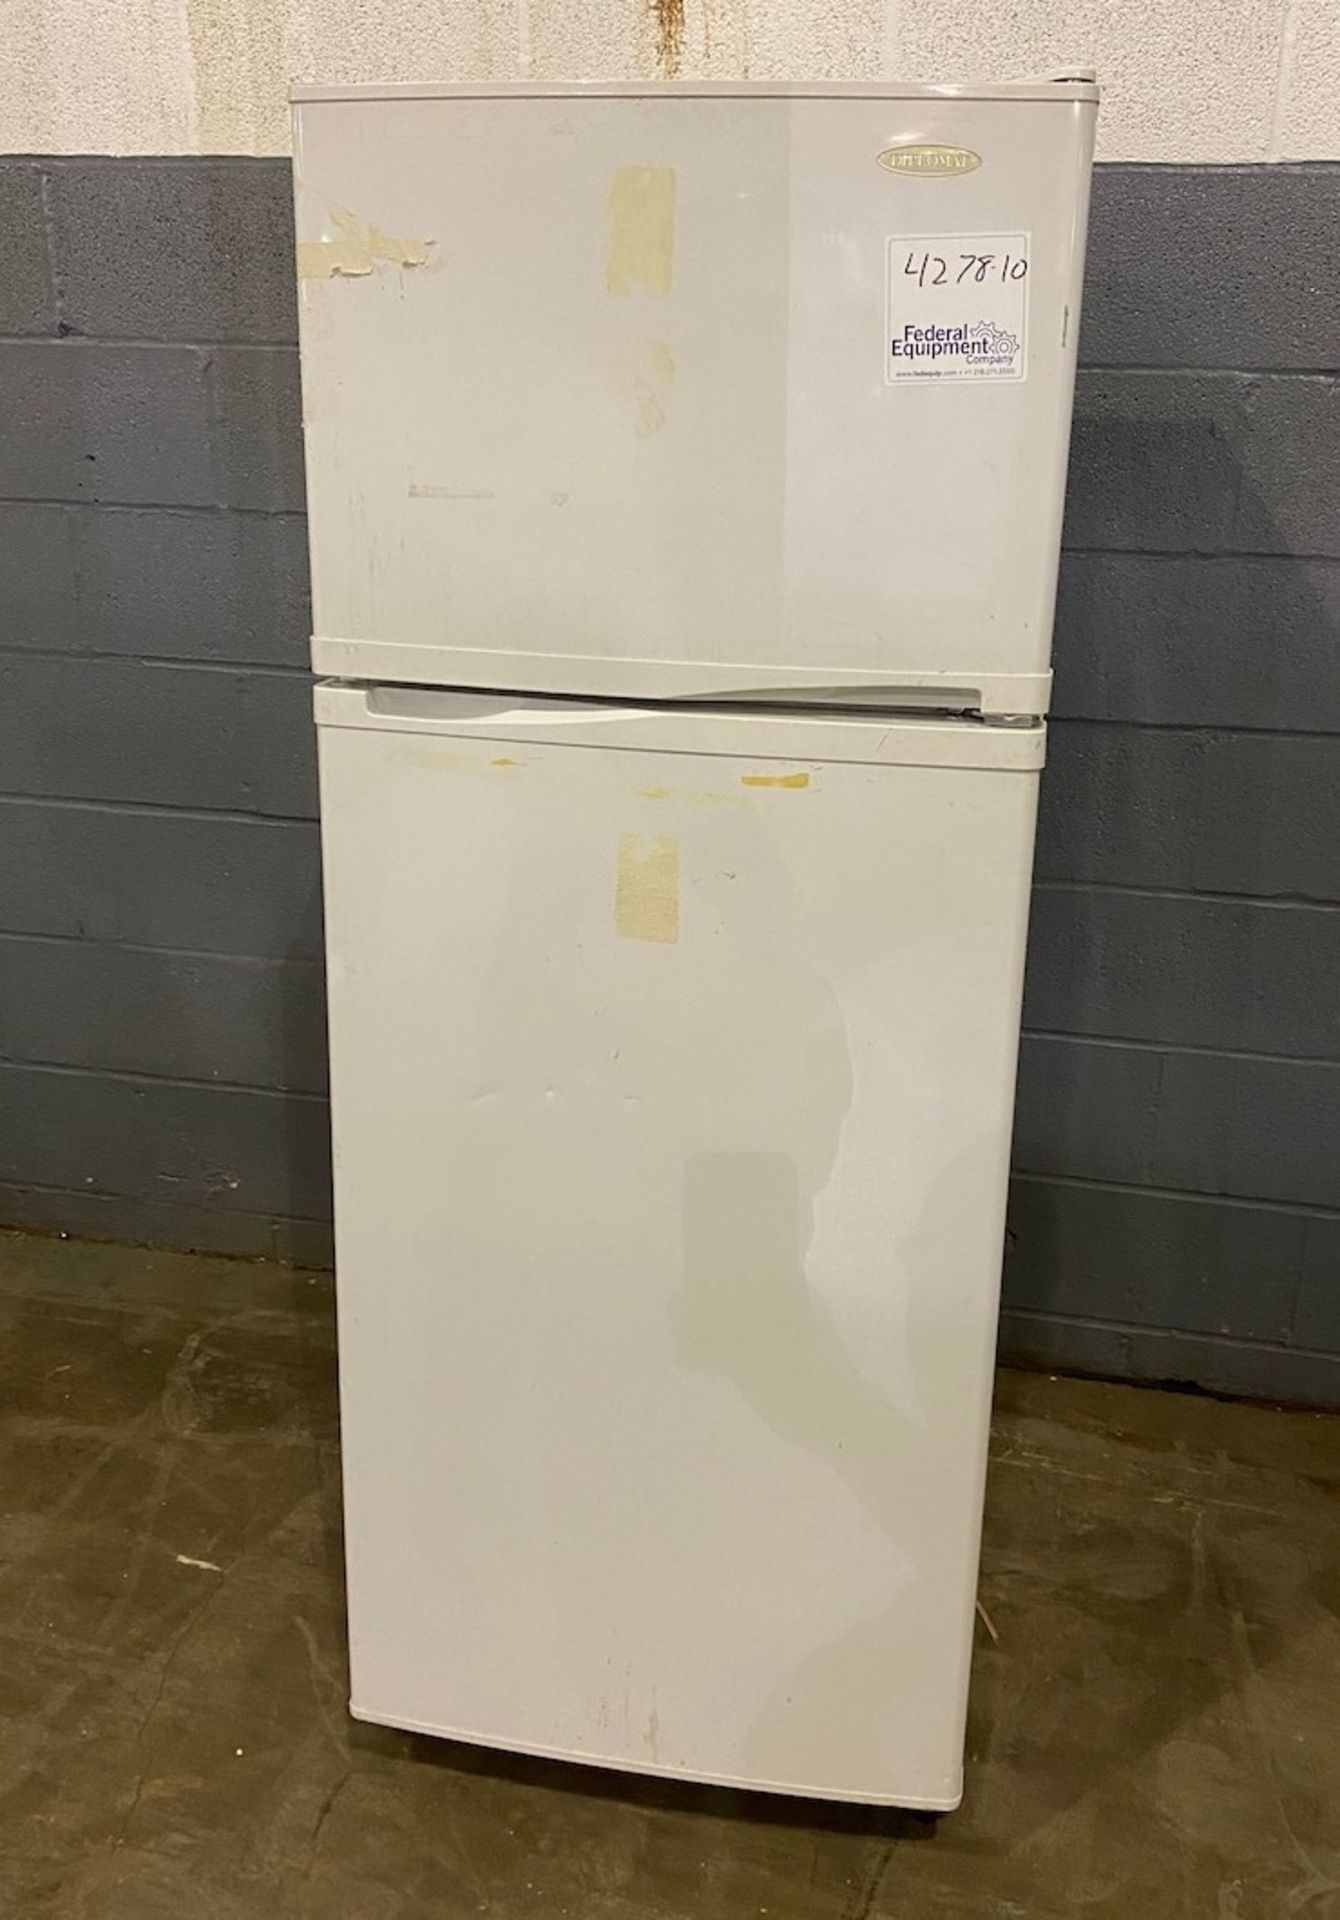 Danby refrigerator and freezer unit, model DFF8803W, made in 2005, S/N DH900742. {TAG: 1180054}